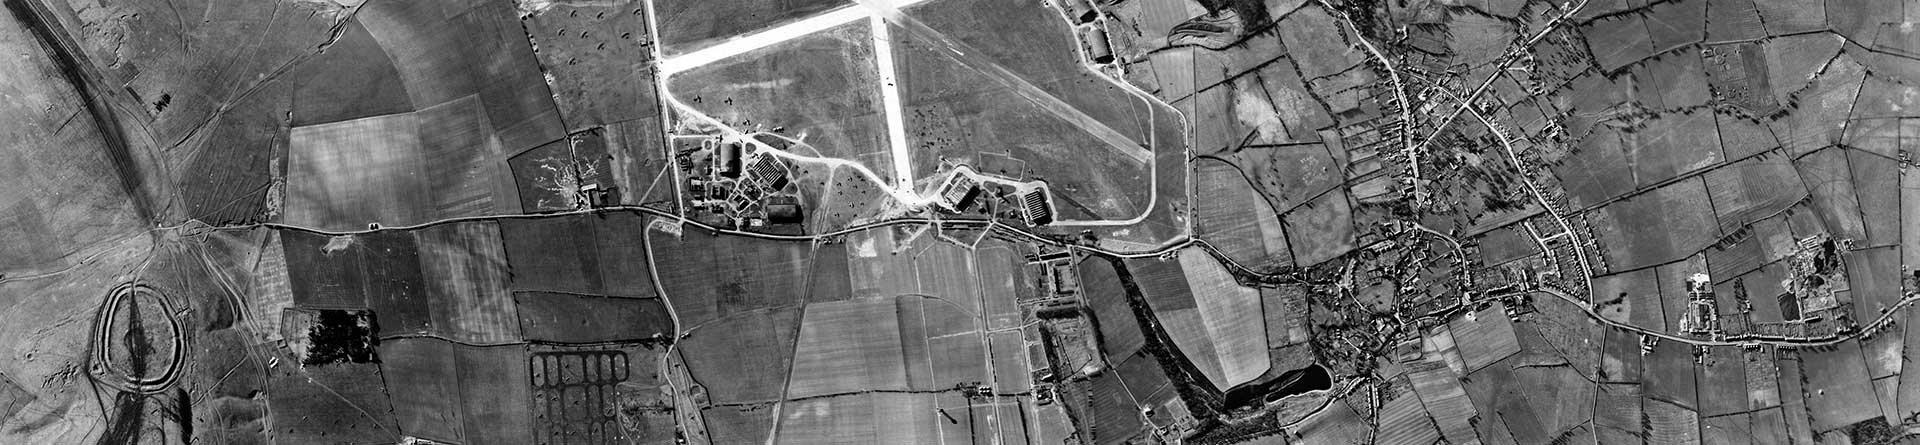 Black and white vertical aerial photograph showing an extensive landscape with fields, roads, houses and an airfield.